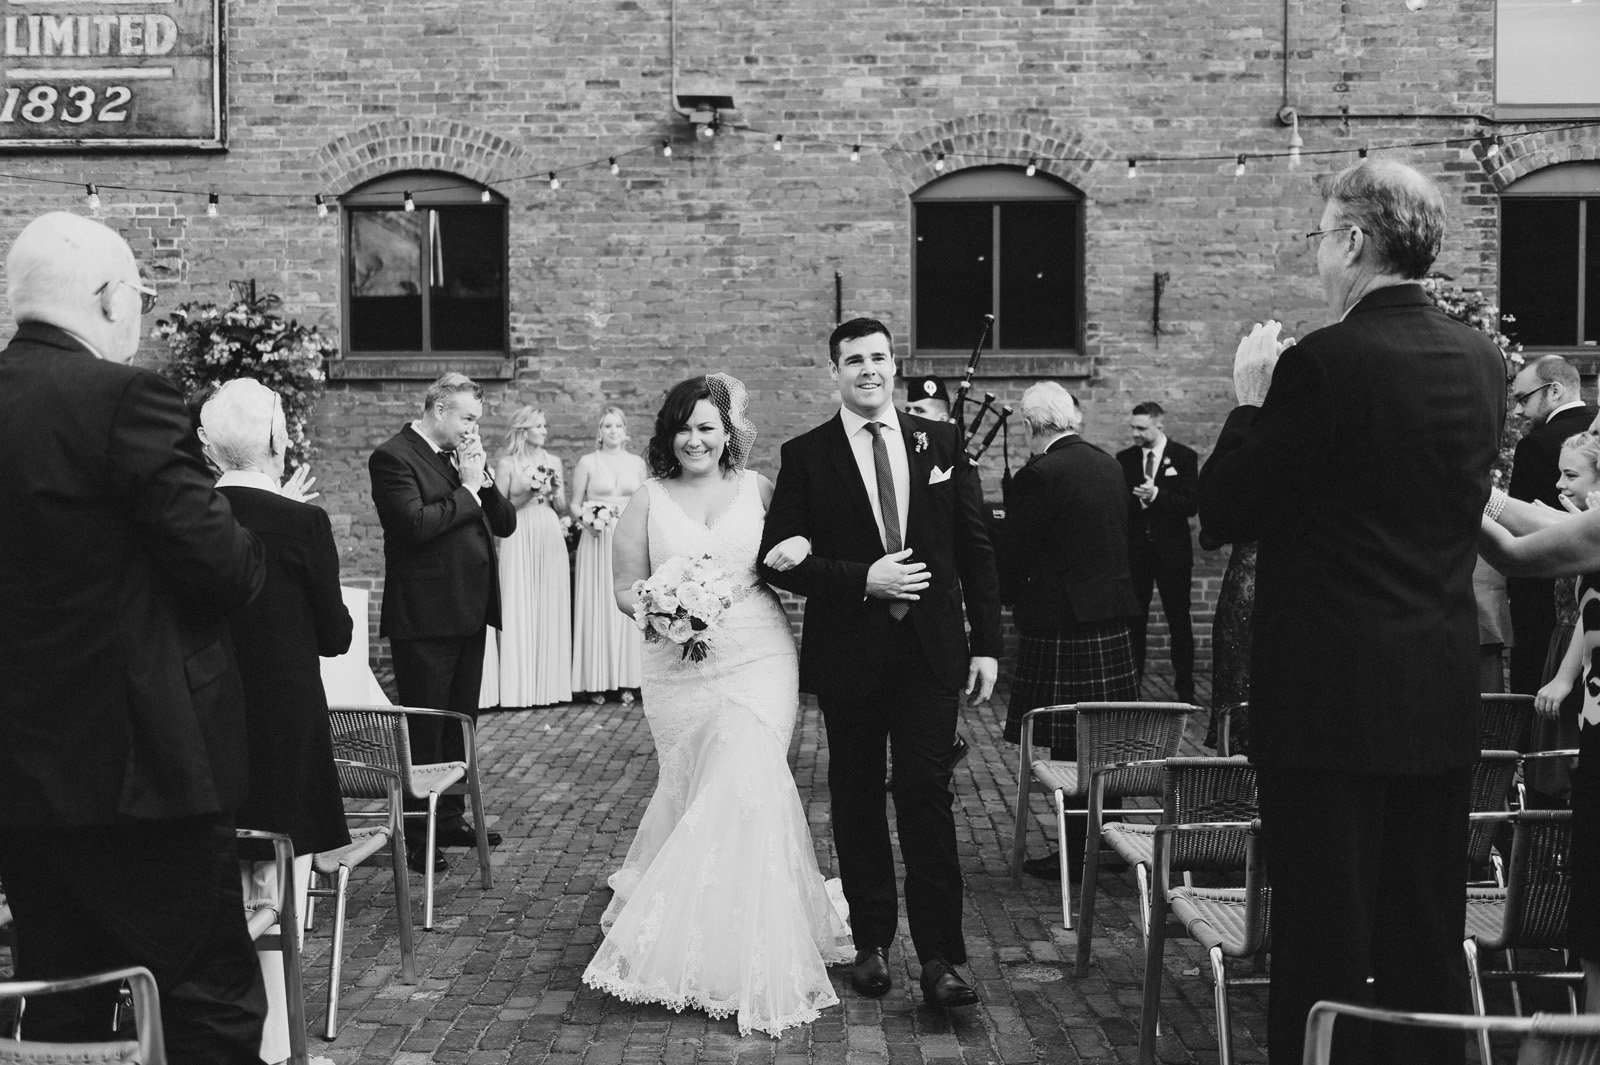 the first sixy seconds of marriage | outdoor wedding ceremony at archeo restaurant | toronto distillery district wedding